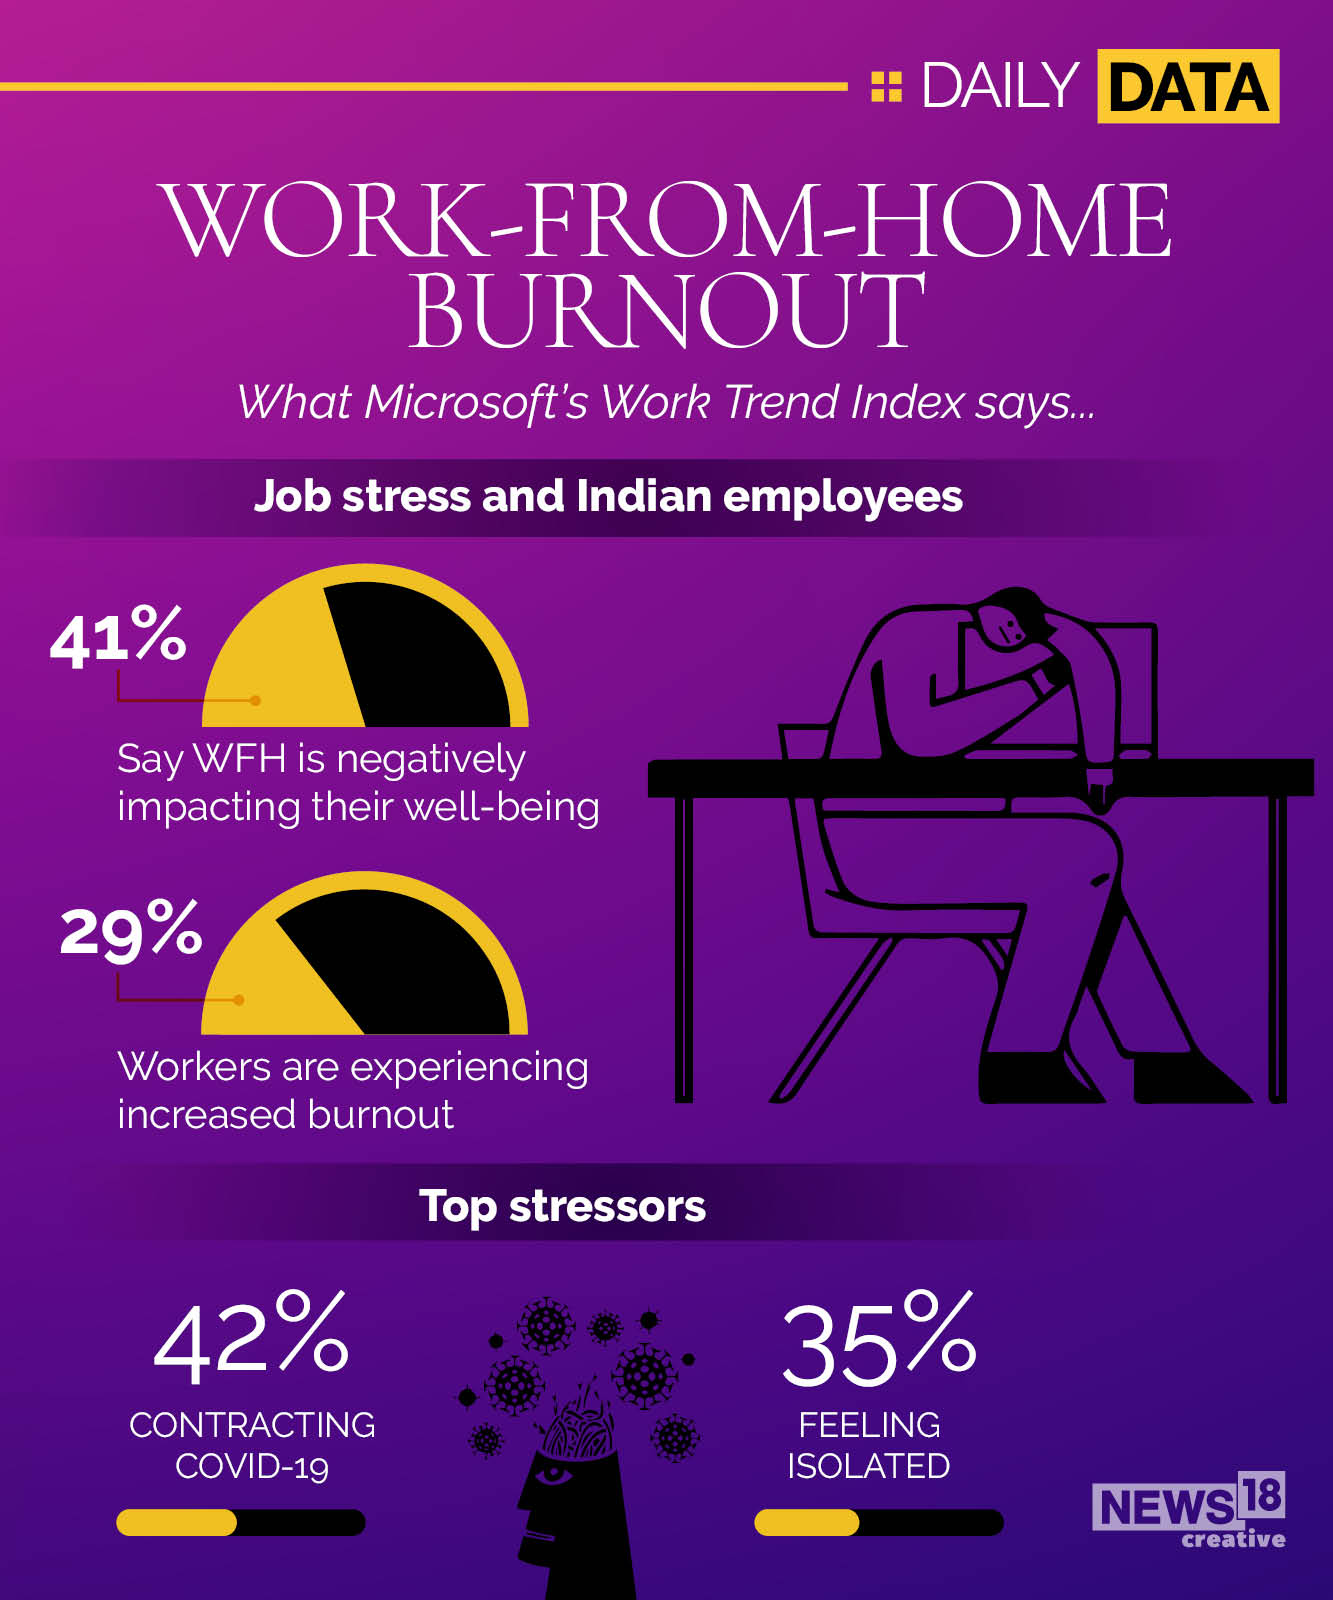 Covid-19: Work from home burnout is real